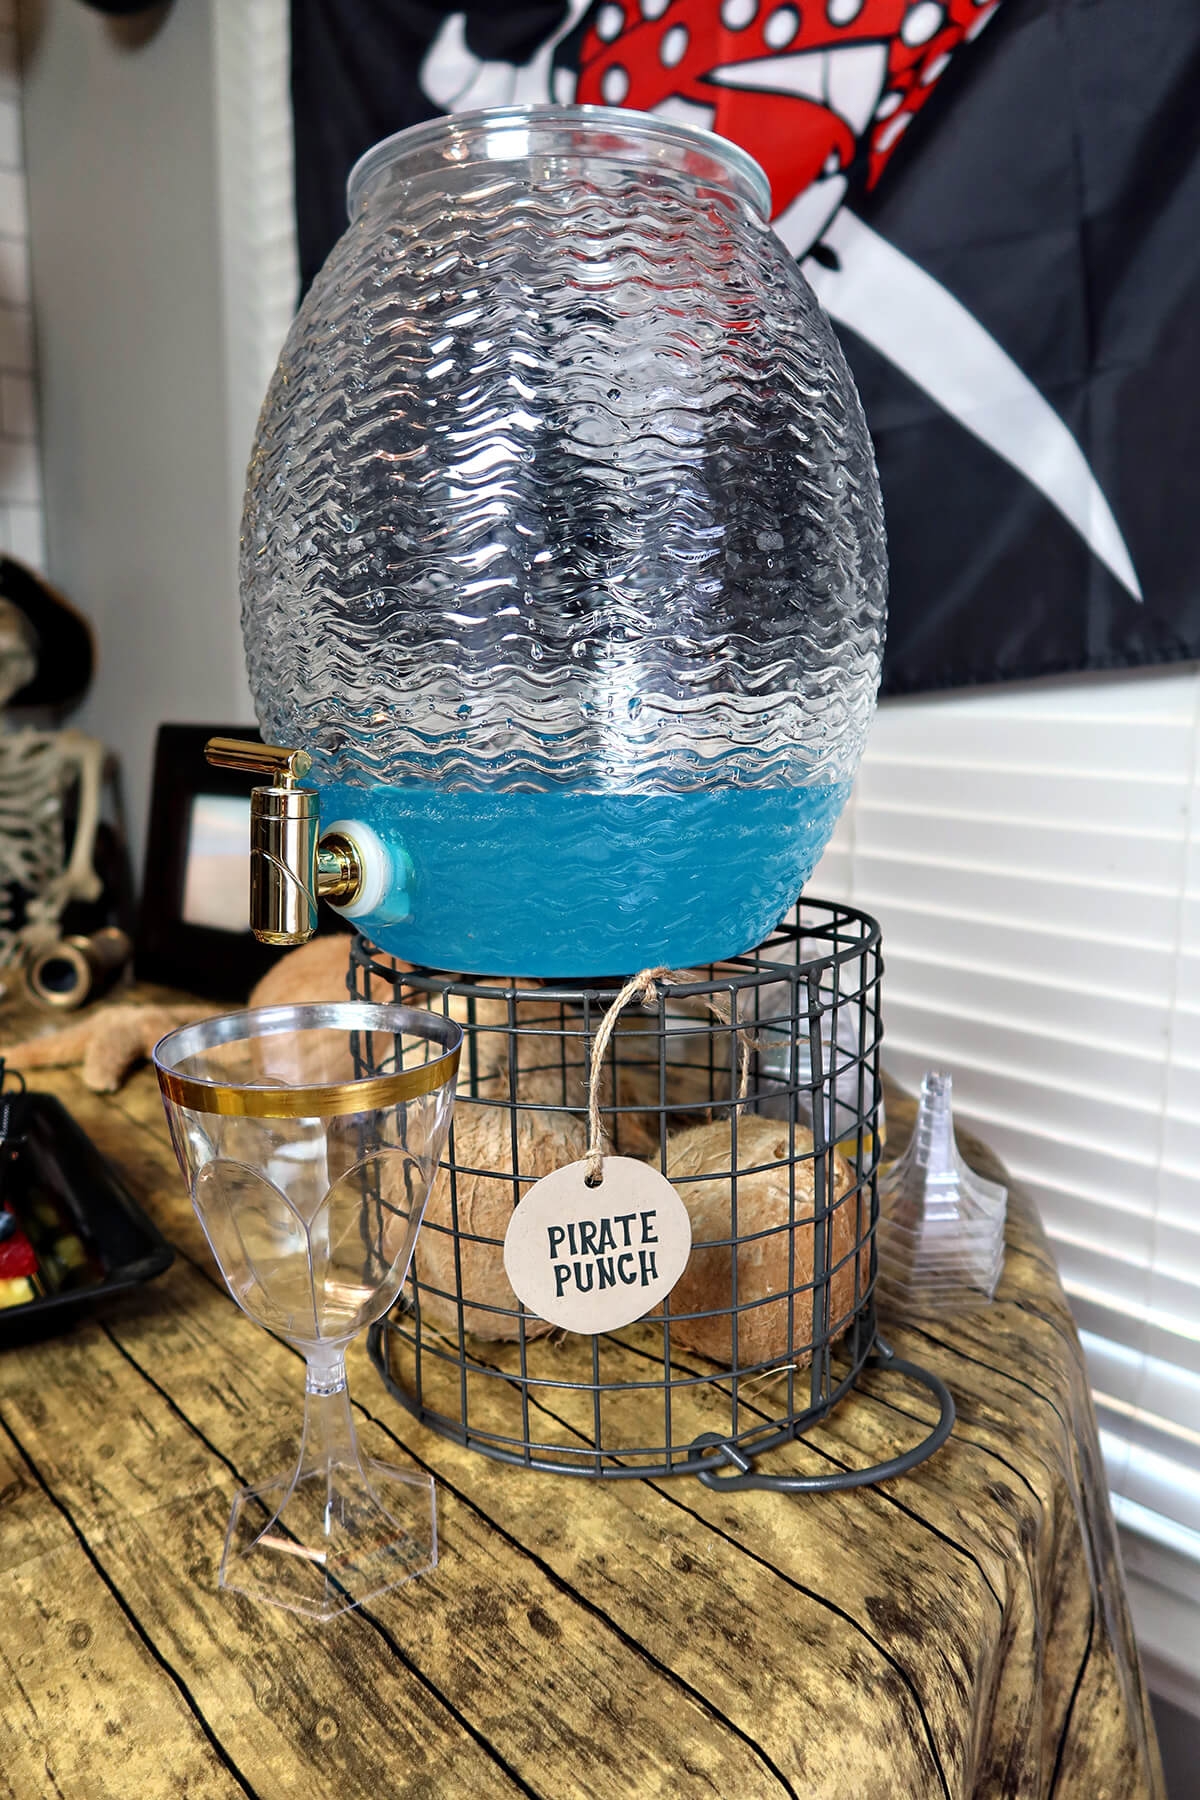 pirate punch - drinks for a kids pirate party